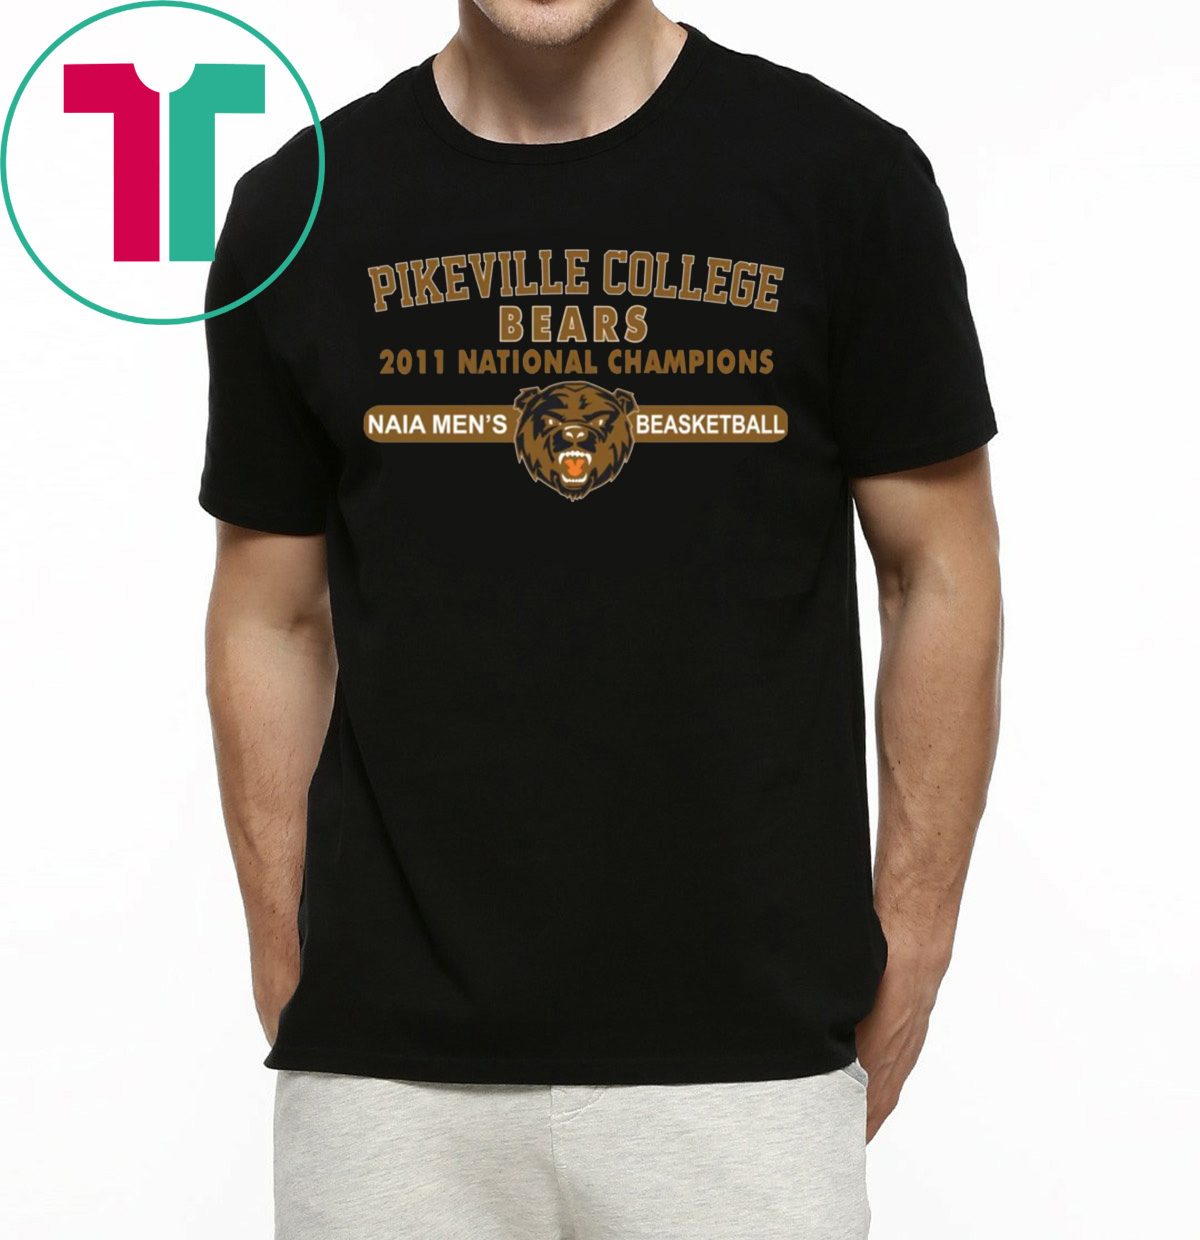 Pikeville College Bears 2011 National Champions Tee Shirt - OrderQuilt.com